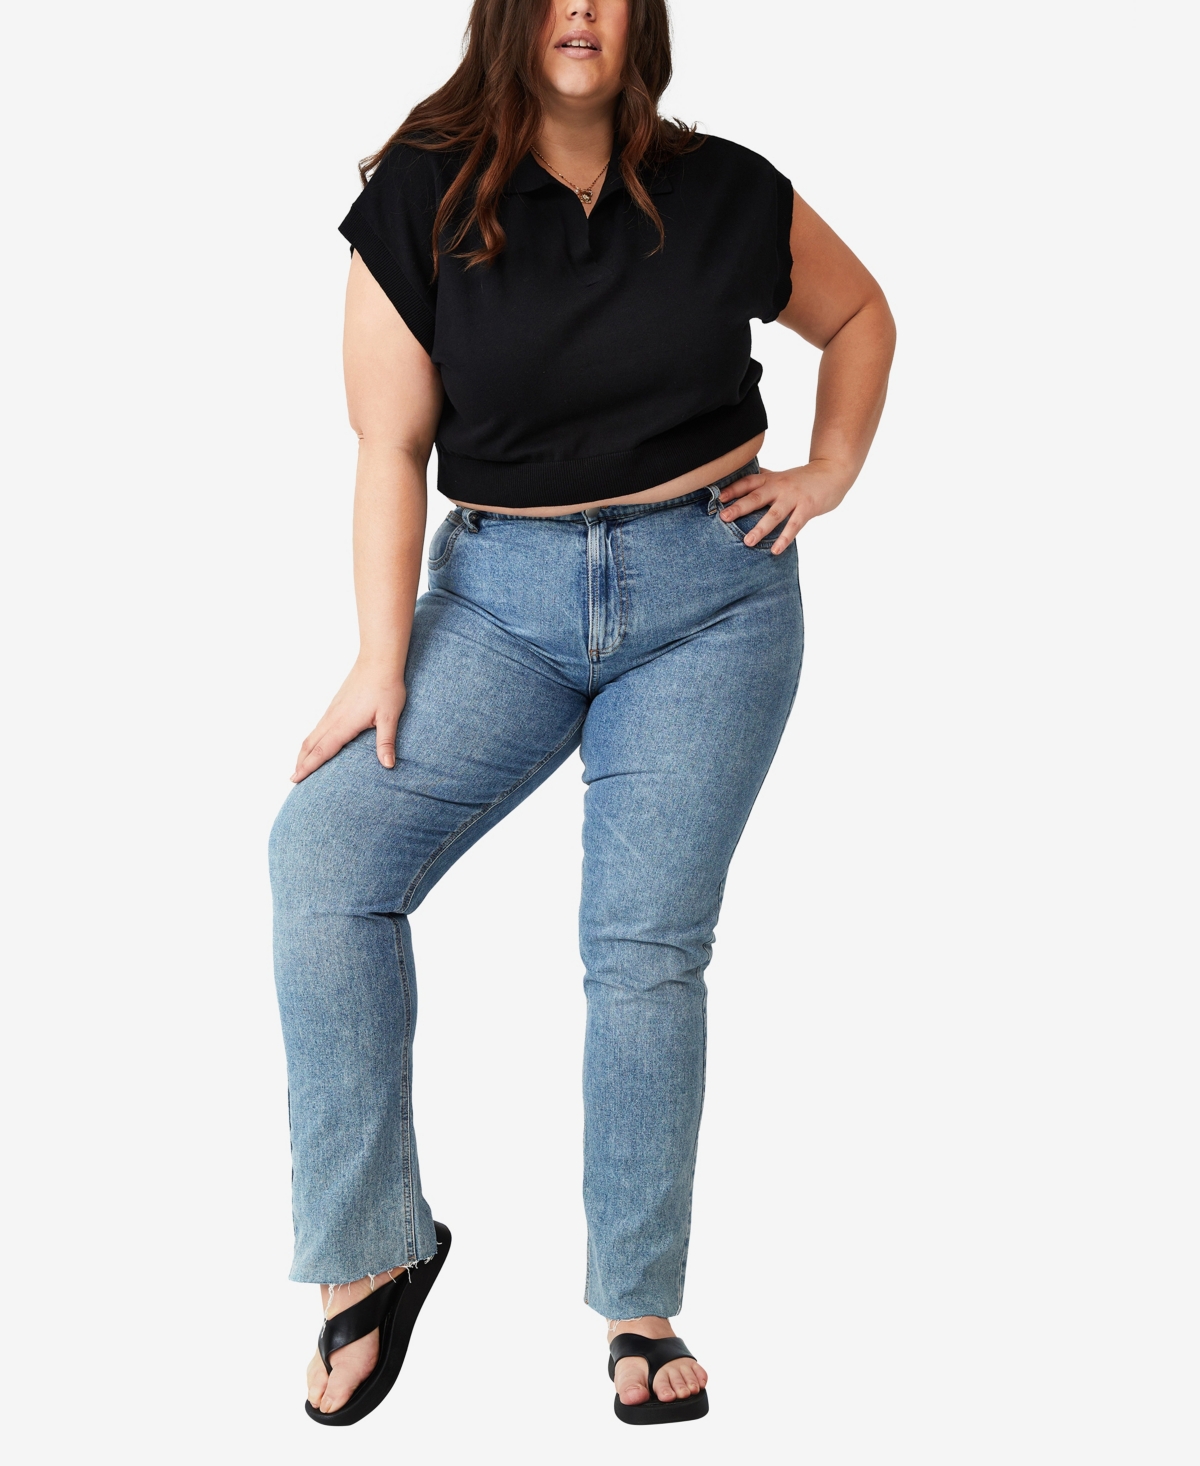 Cotton On Trendy Plus Size Cropped Polo T-shirt